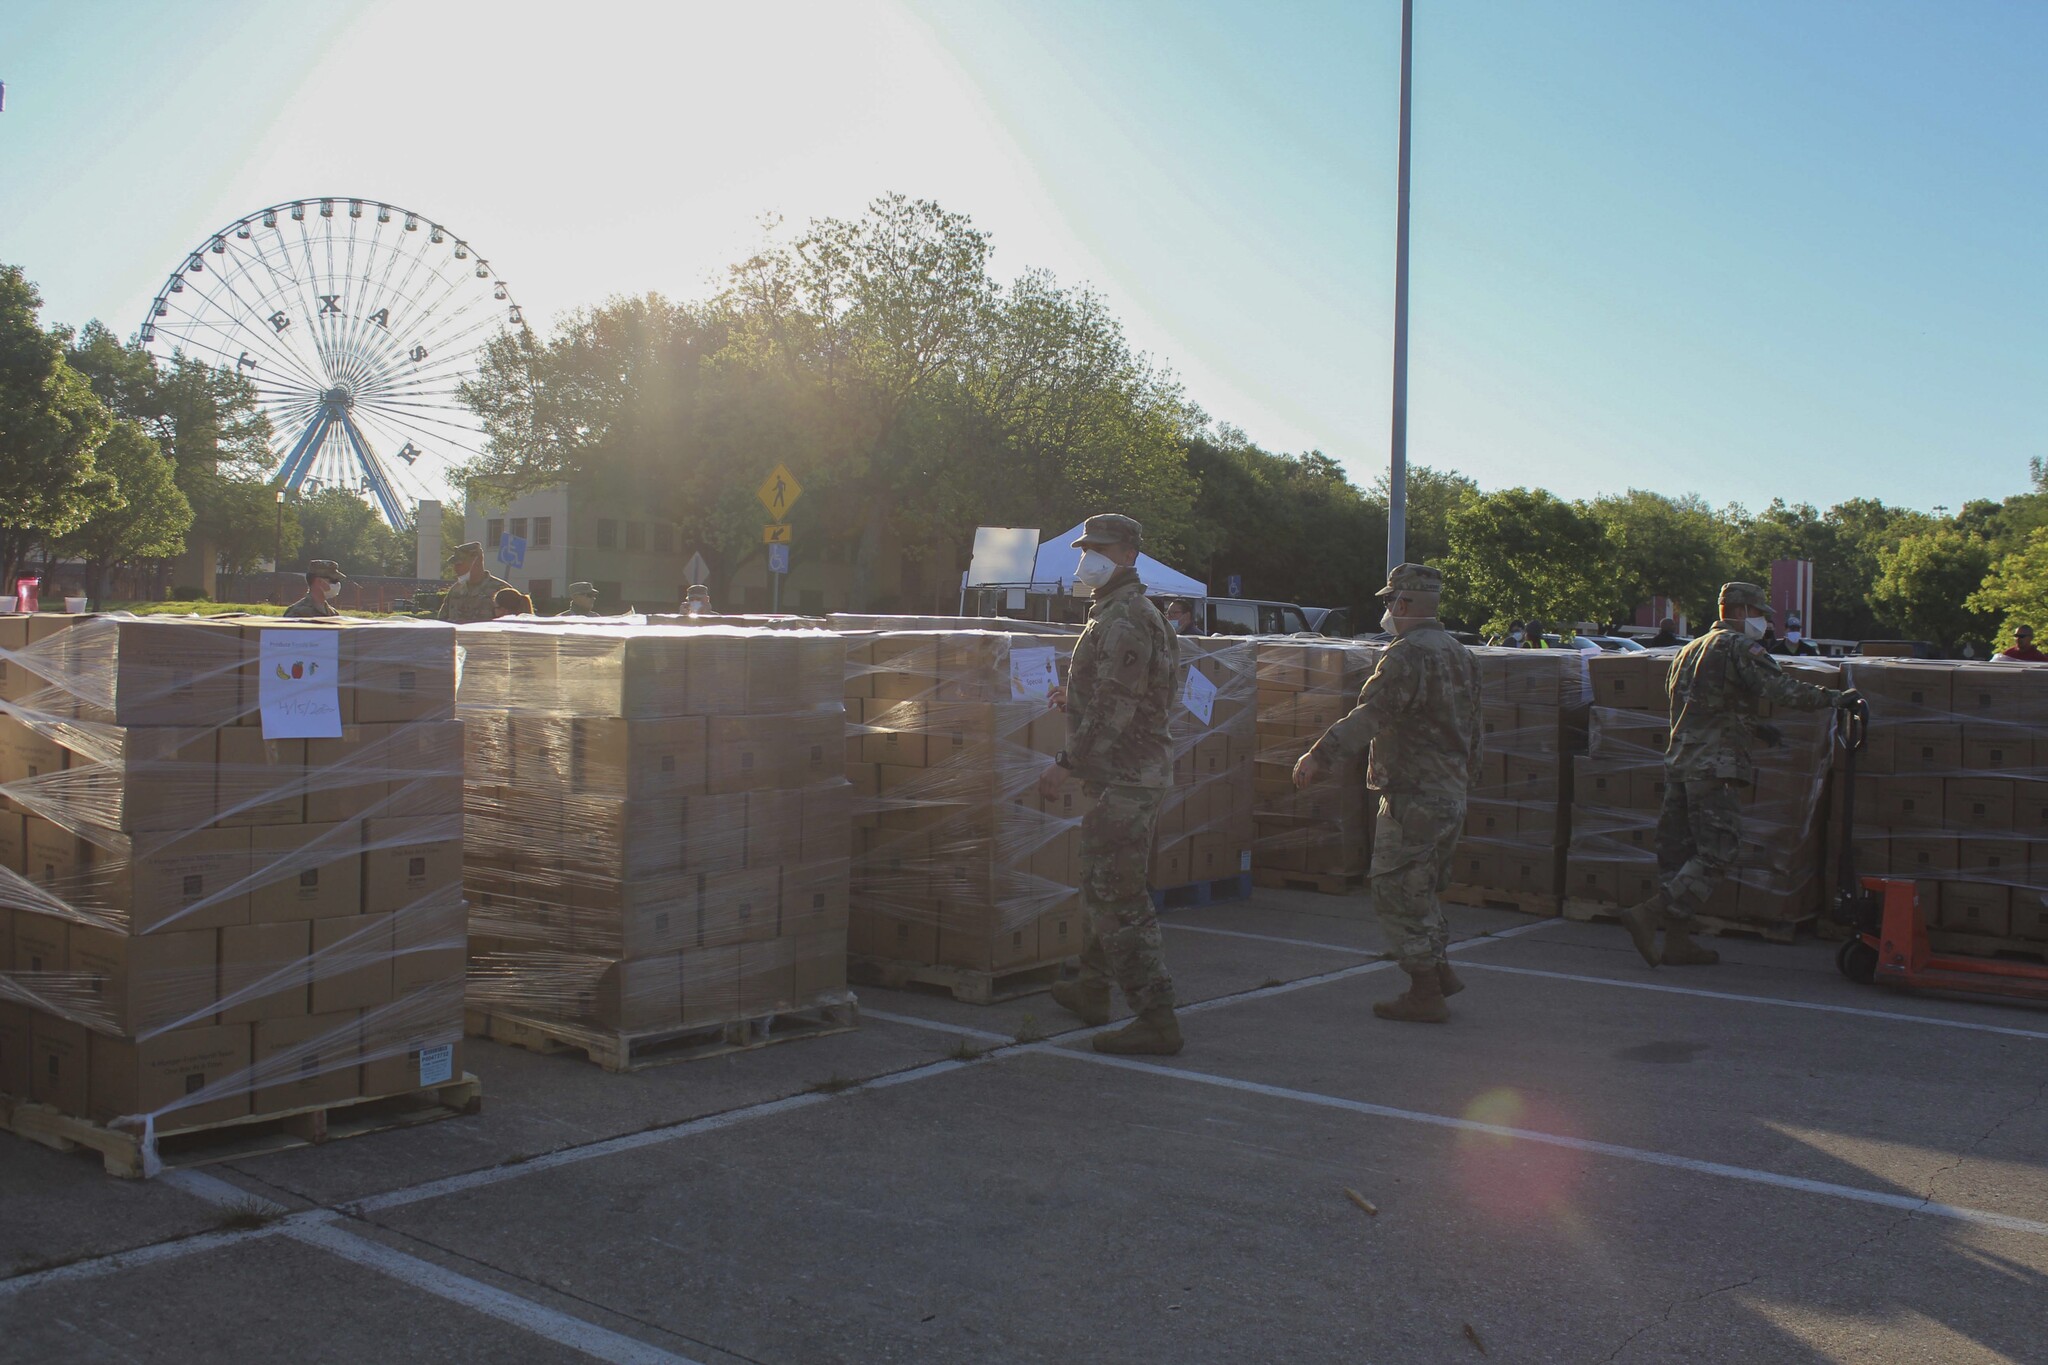 Since the onset of COVID-19, the Food Bank has doubled food distribution via the Mobile Pantry as well as to local members of the NTFB Feeding Network. Support from the Texas National Guard has enabled the Food Bank to provide additional food and resources for those in need. 